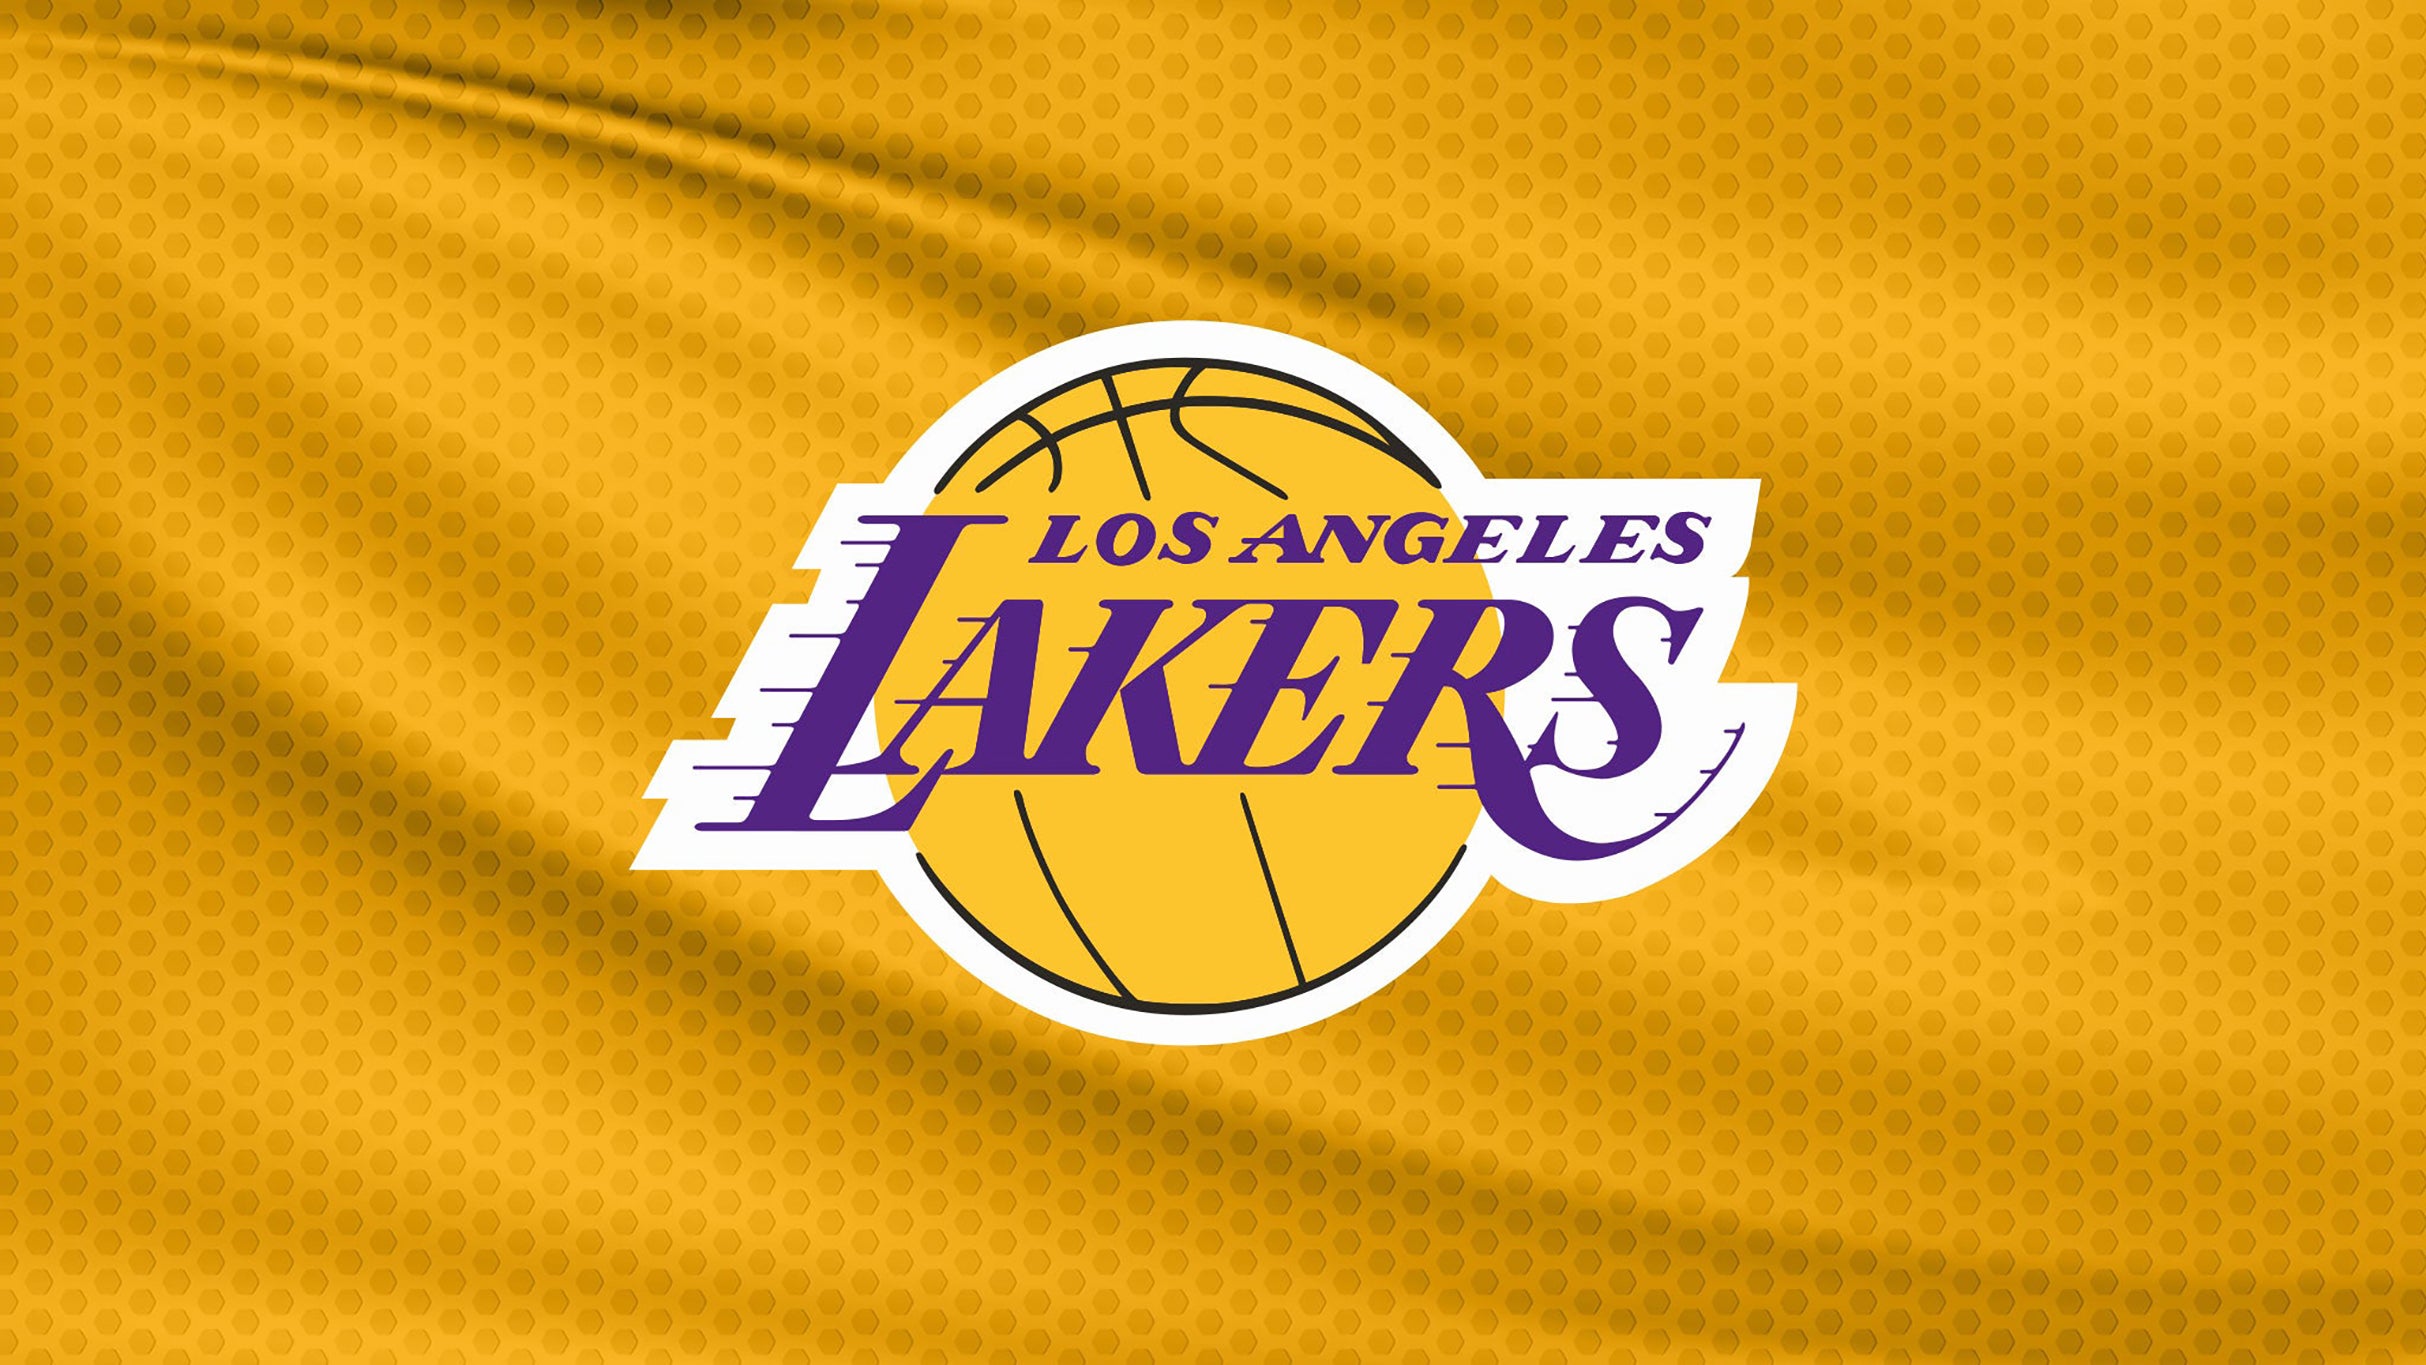 Los Angeles Lakers vs Golden State Warriors in Los Angeles promo photo for TM+ Resale presale offer code